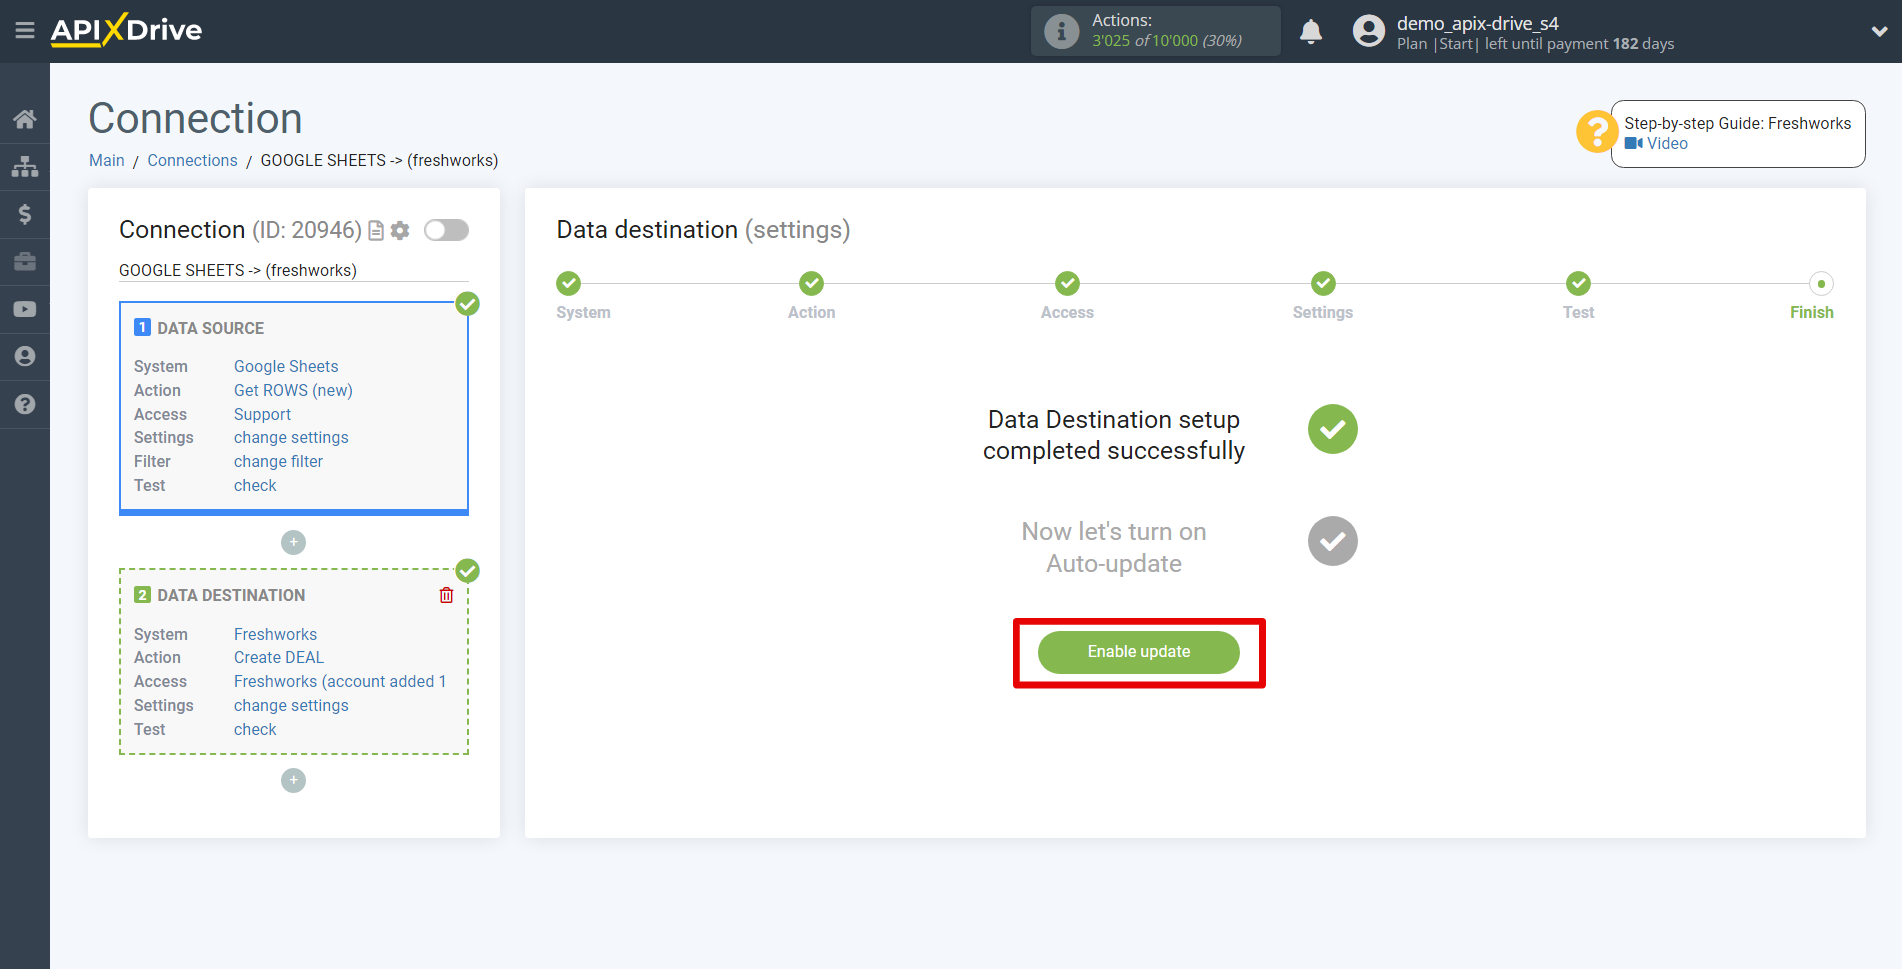 How to Connect Freshworks as Data Destination | Enable auto-update